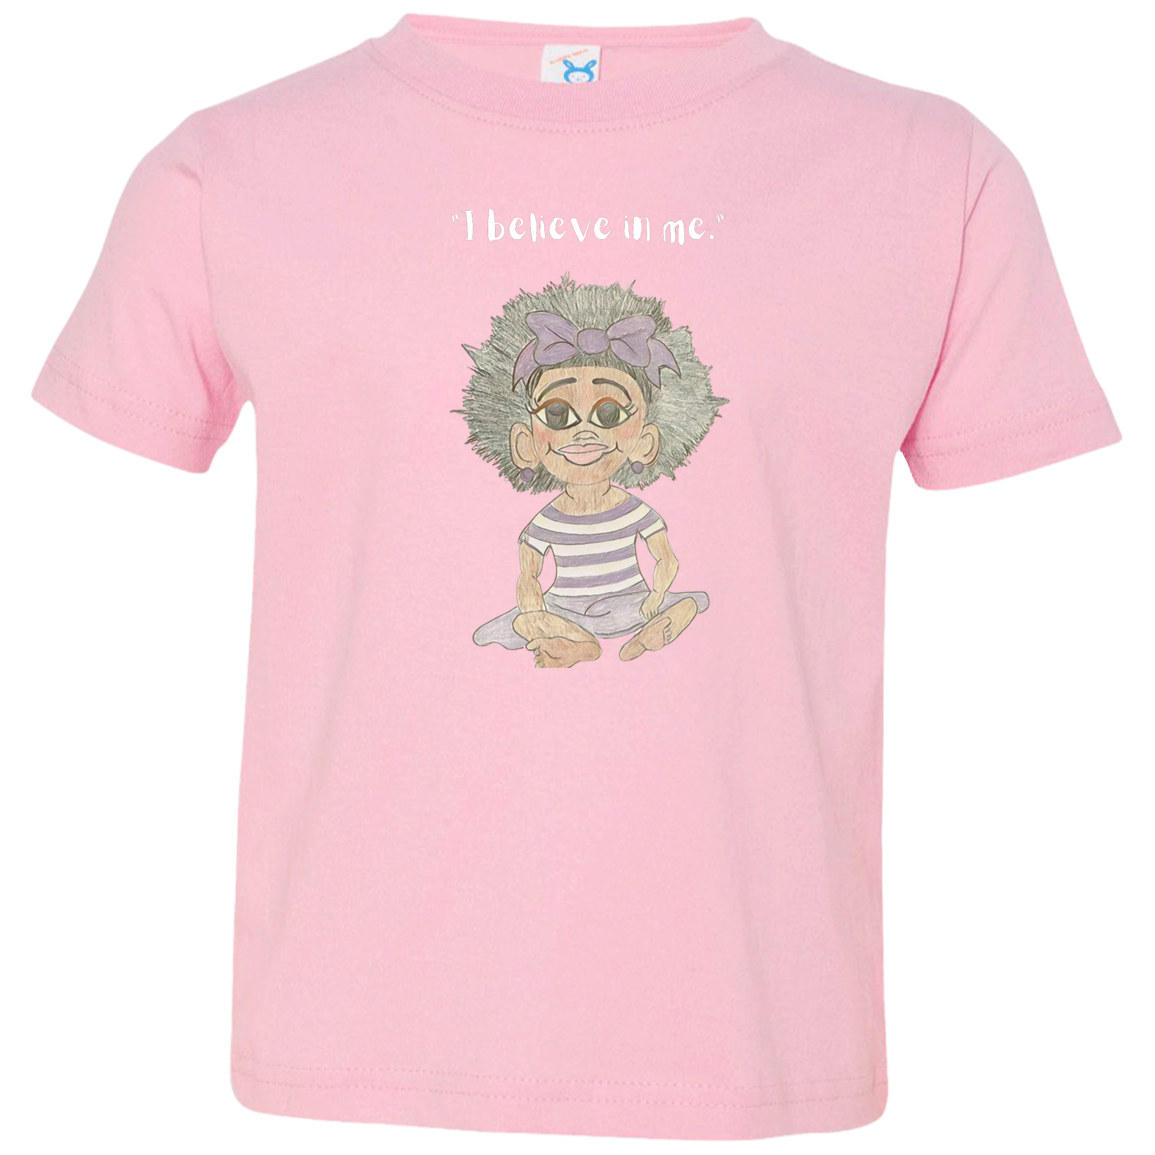 I believe in me Toddler Jersey T-Shirt